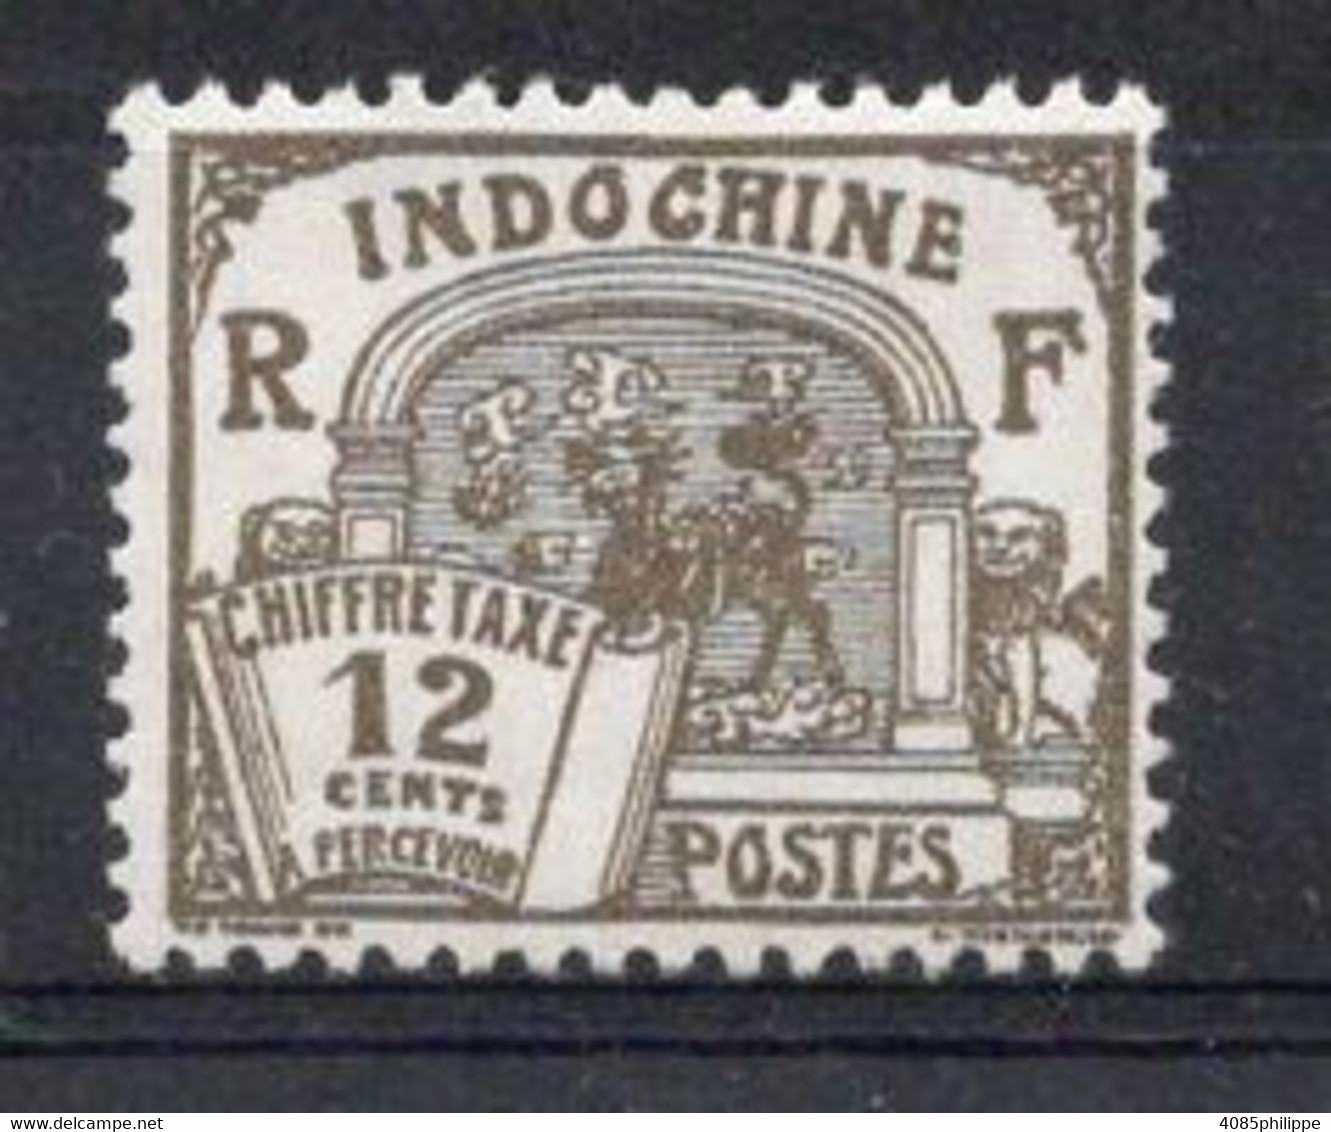 INDOCHINE Timbre Taxe N°53* Neuf Gomme Tachée Cote 7€00 - Timbres-taxe